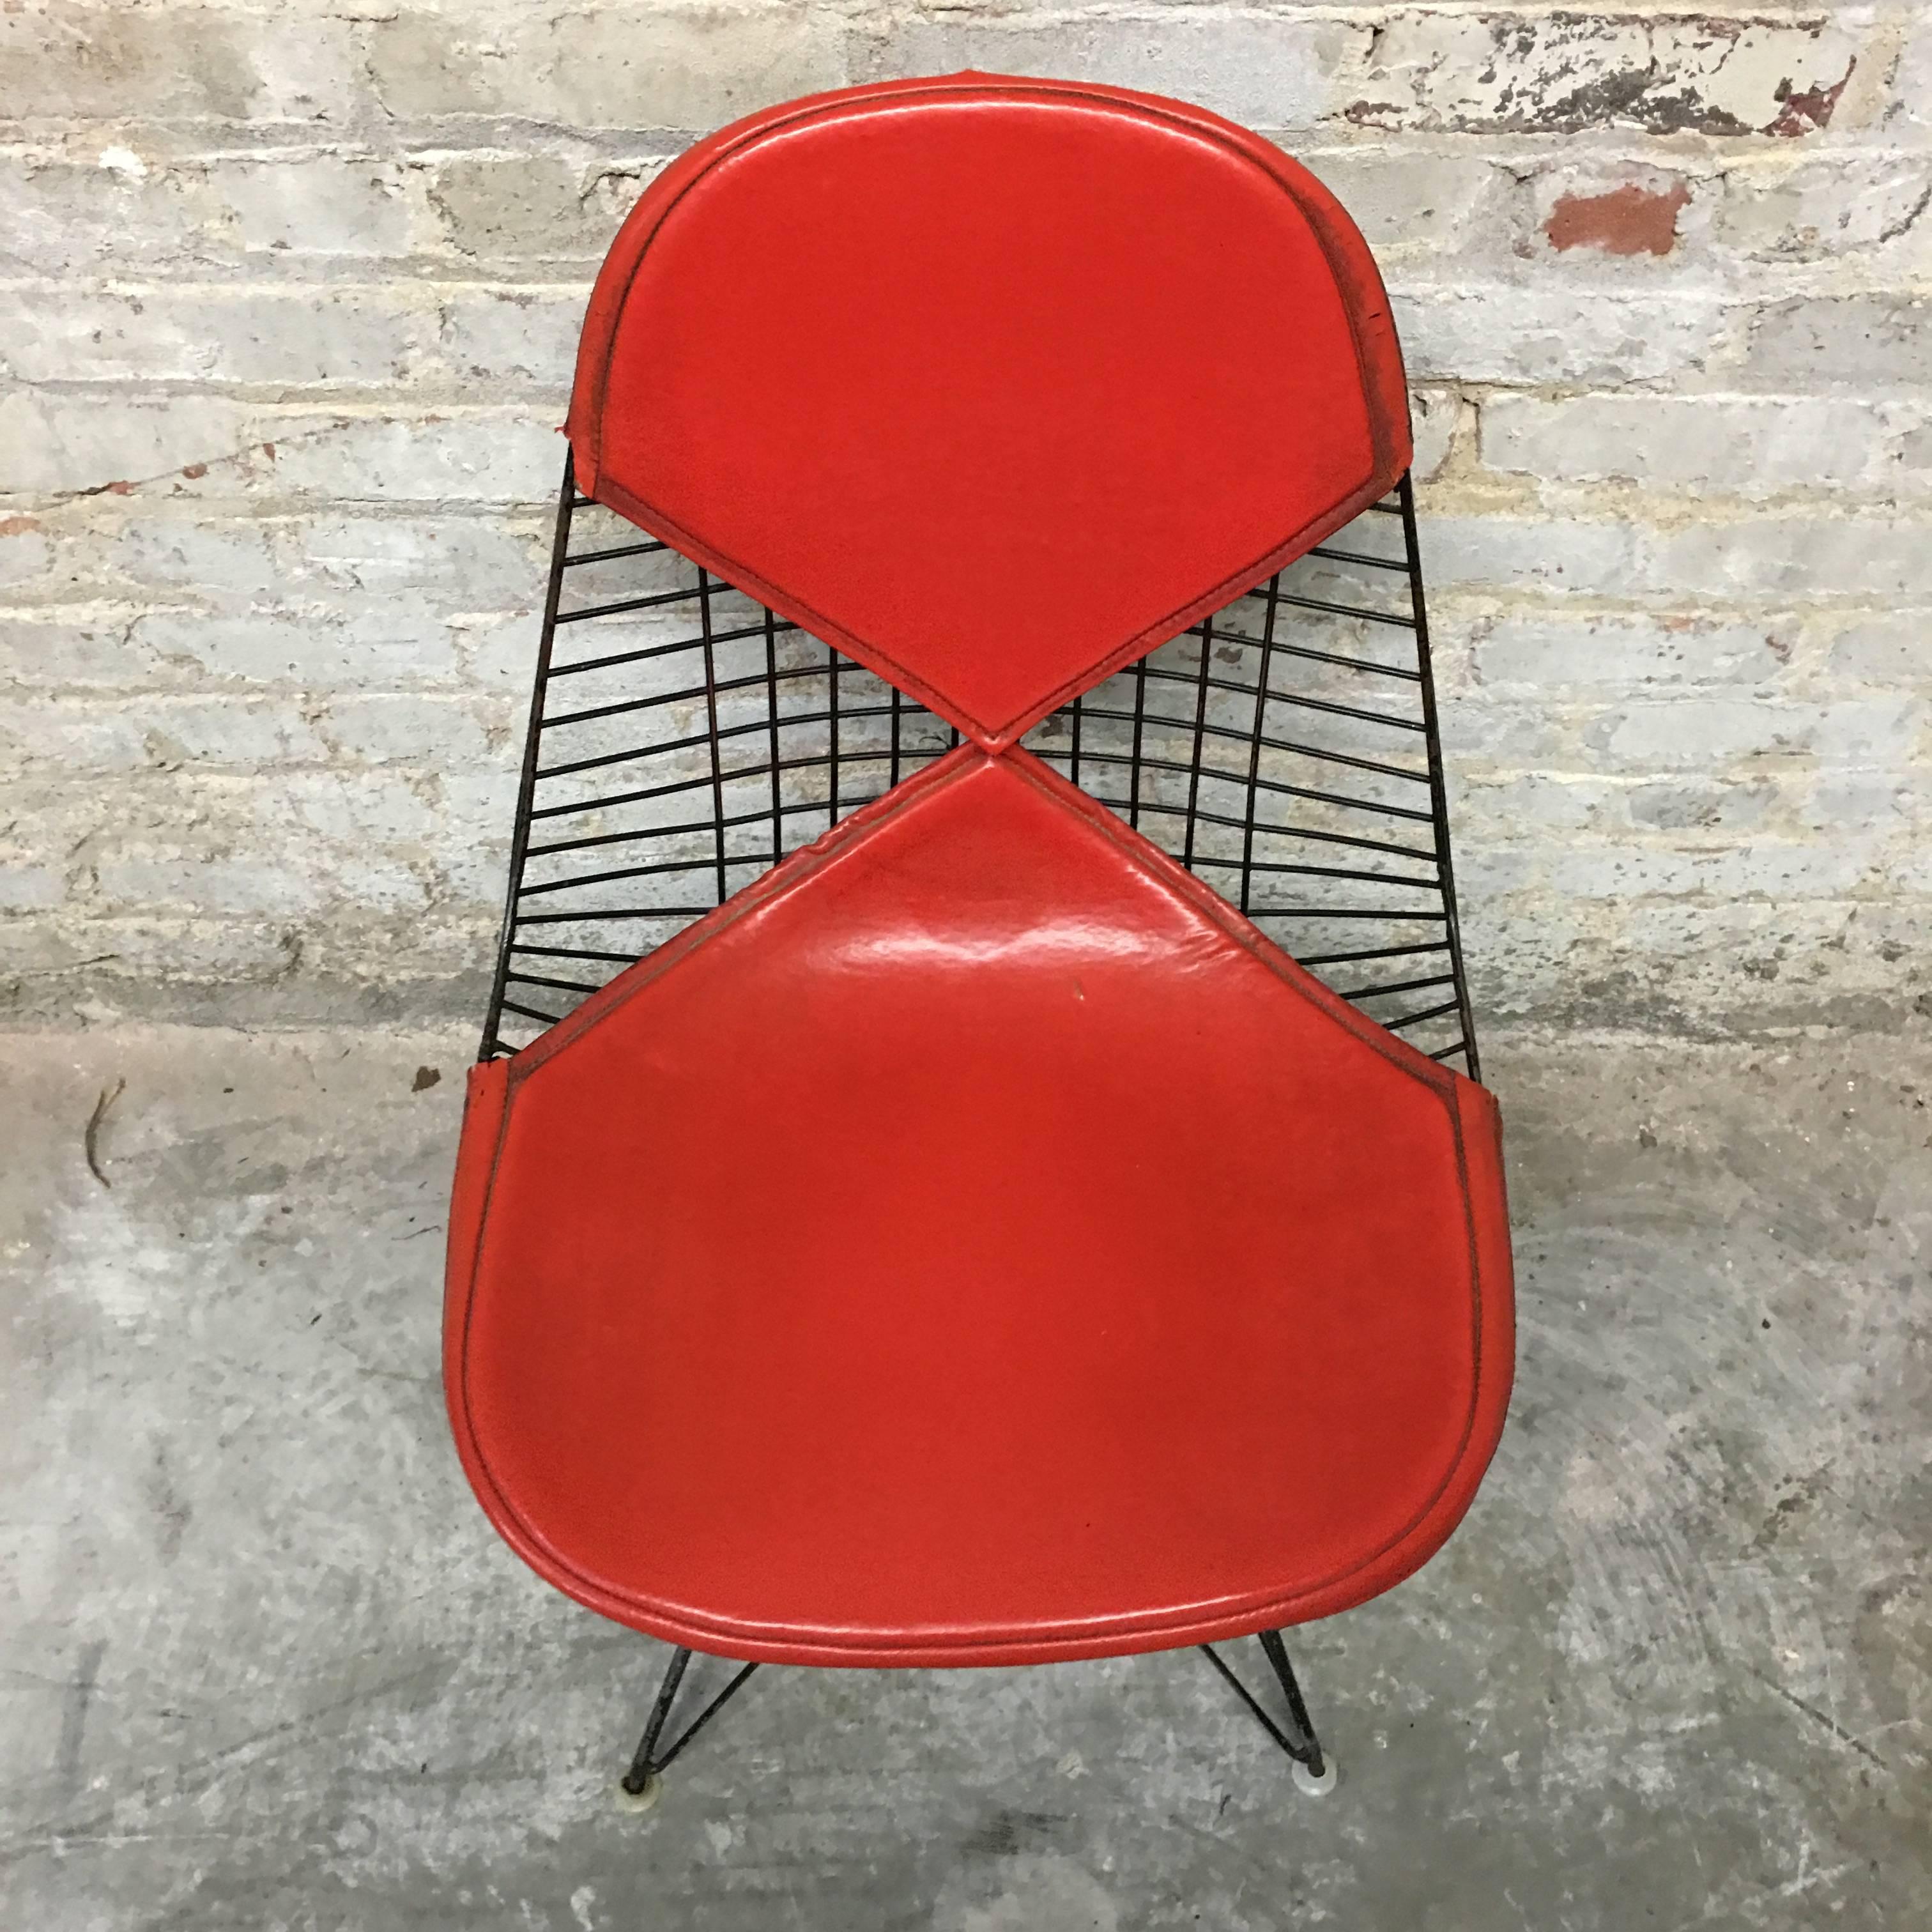 Herman Miller Eames DKR-2 Bikini chair on Eiffel base. All glides intact. Naugahyde pads in very good vintage condition with normal wear commensurate with age and use. Excellent bright red pads with no fading. Base welded to shell so this cannot be